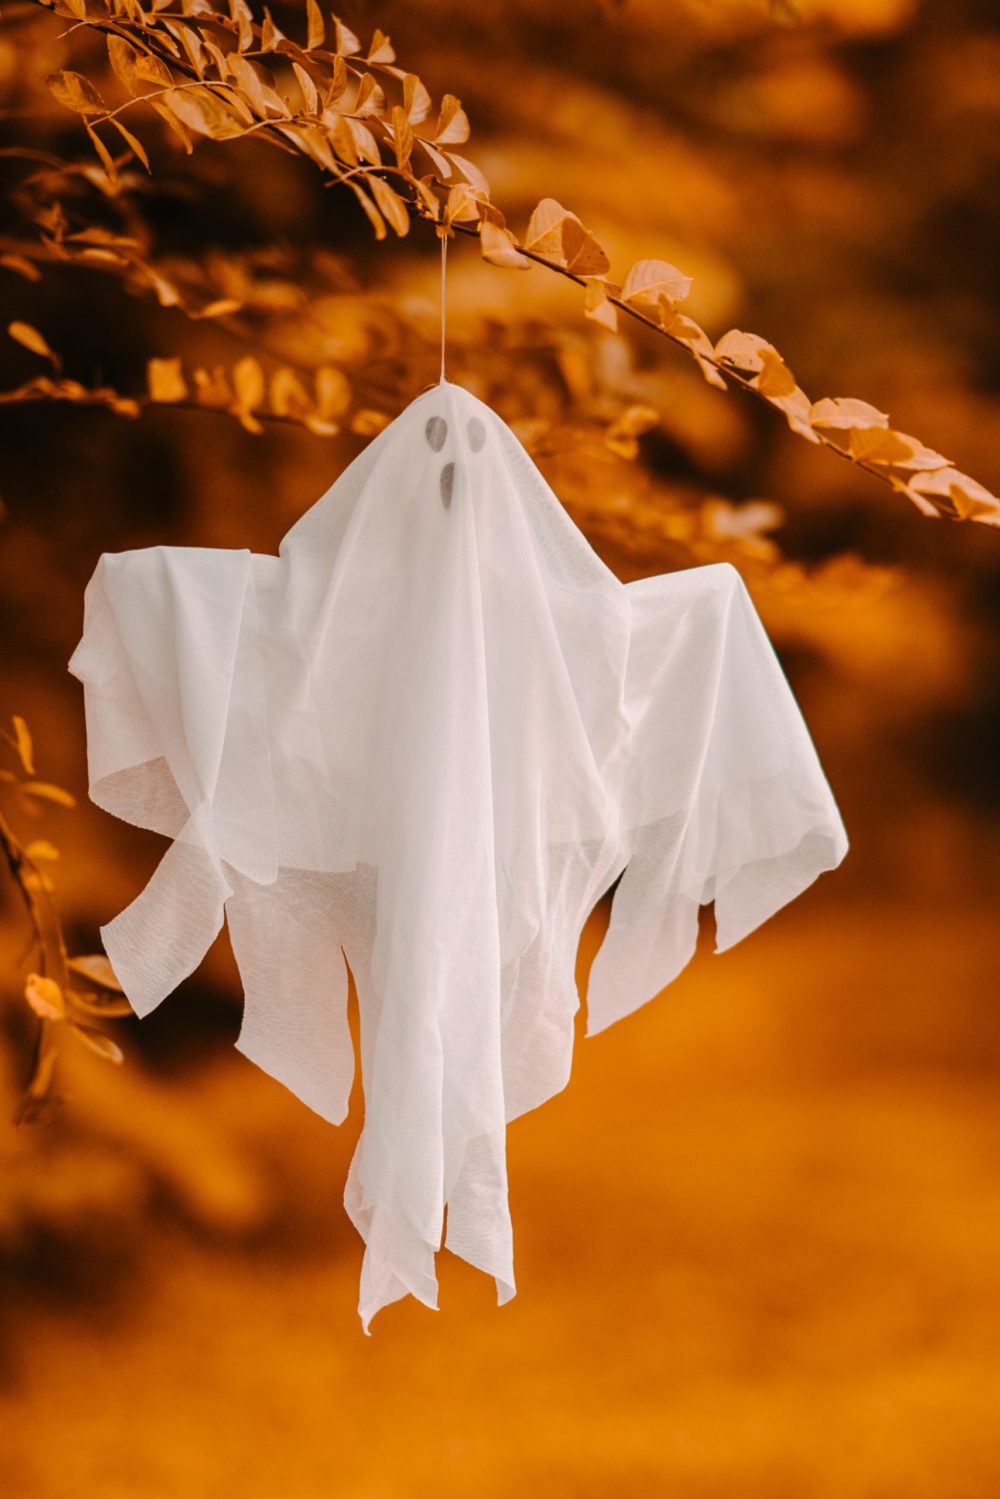 Ghost in a tree